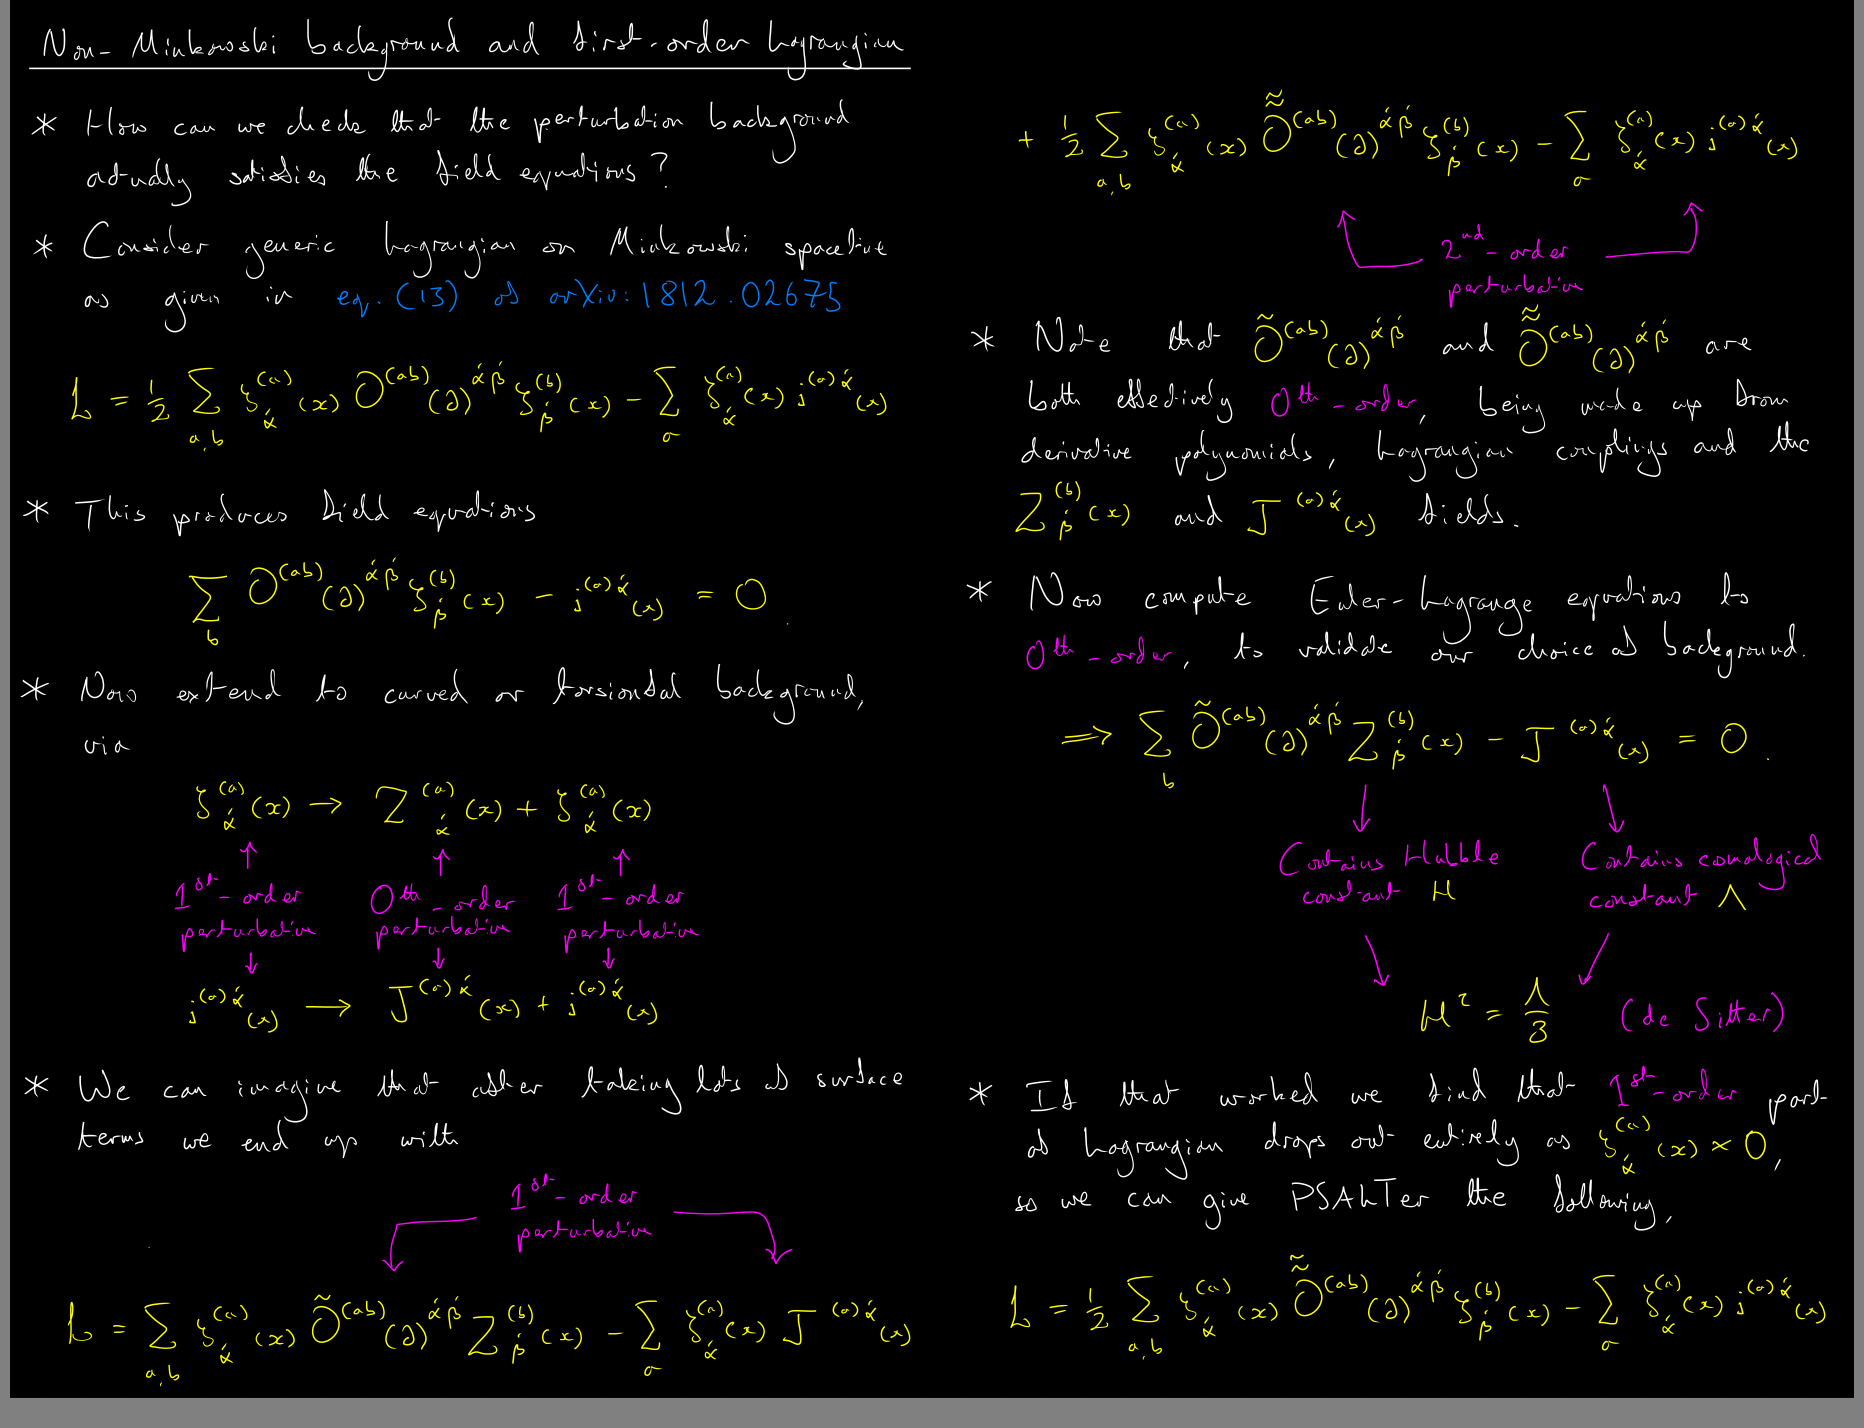 Supervision notes on the non-Minkowski background and the first-order Lagrangian.